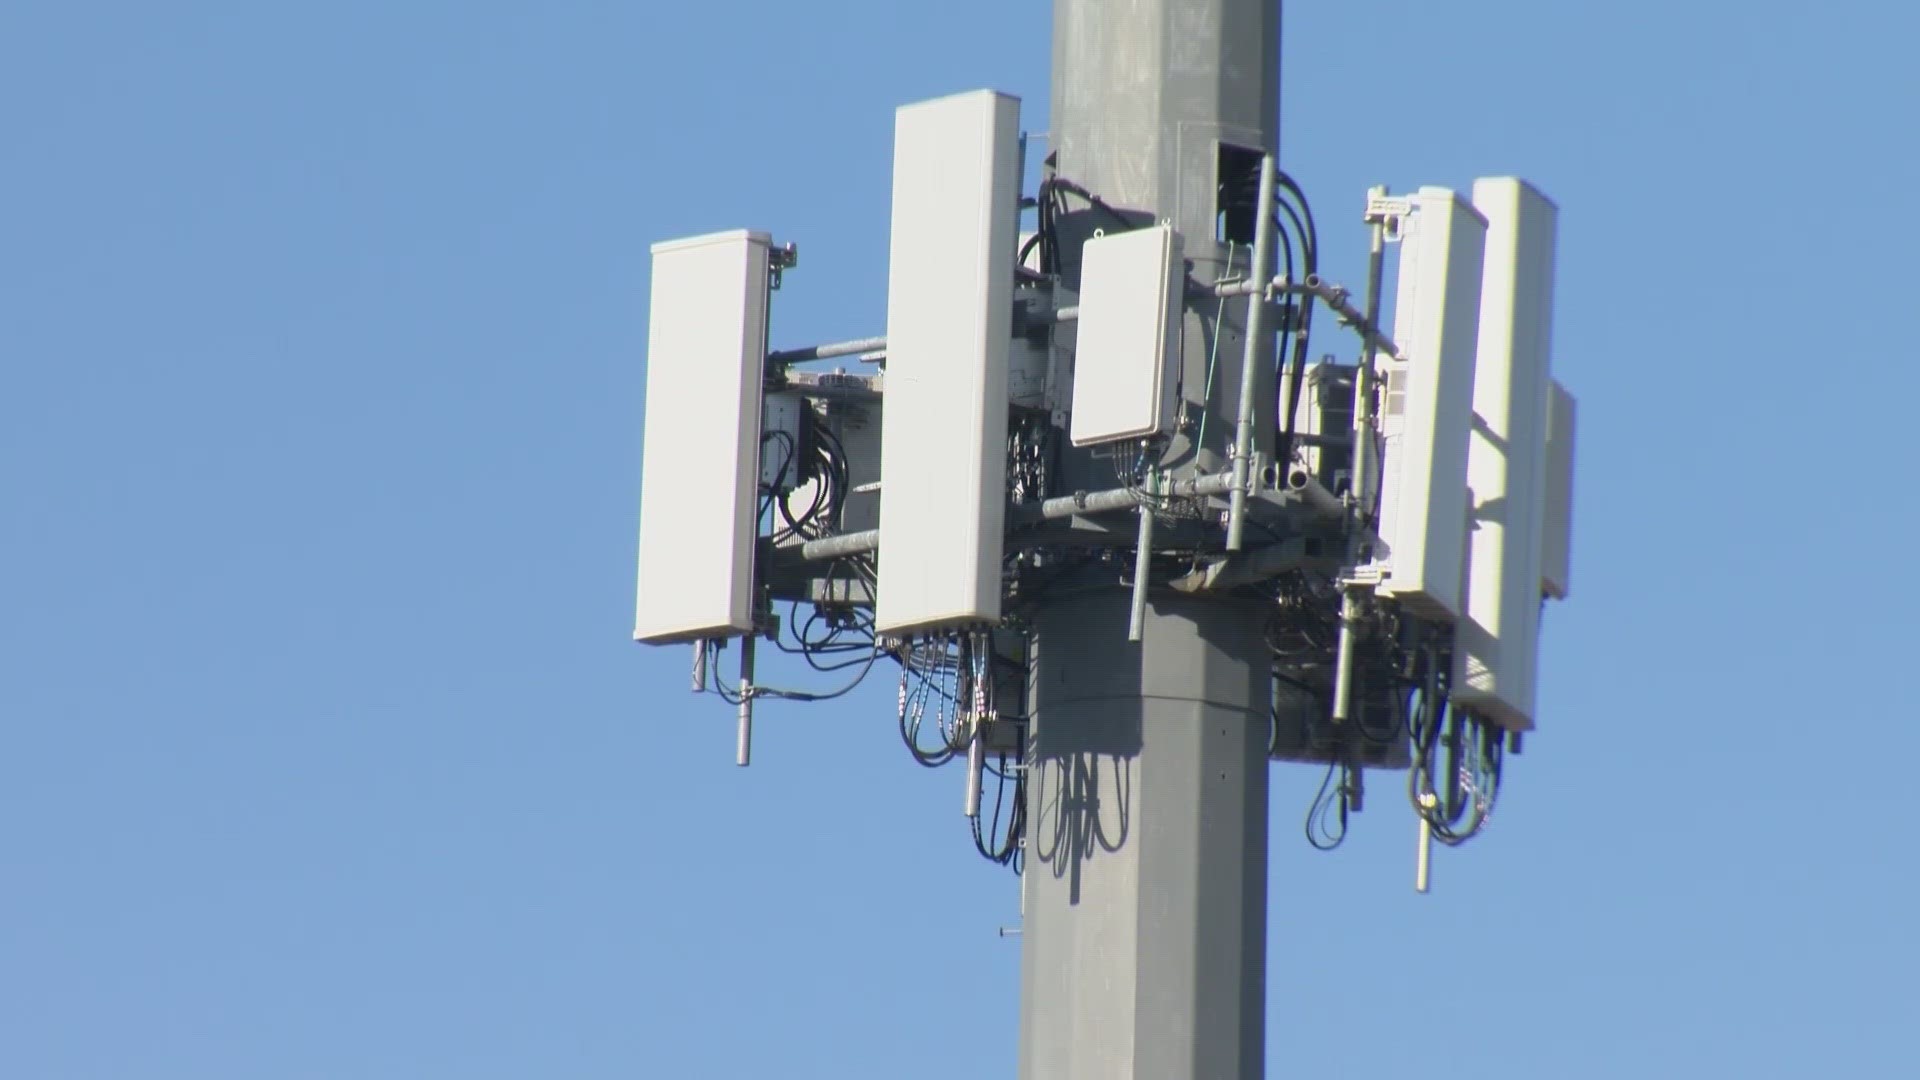 Court documents show that Sean Aaron Smith attempted to destroy multiple cell phone towers.